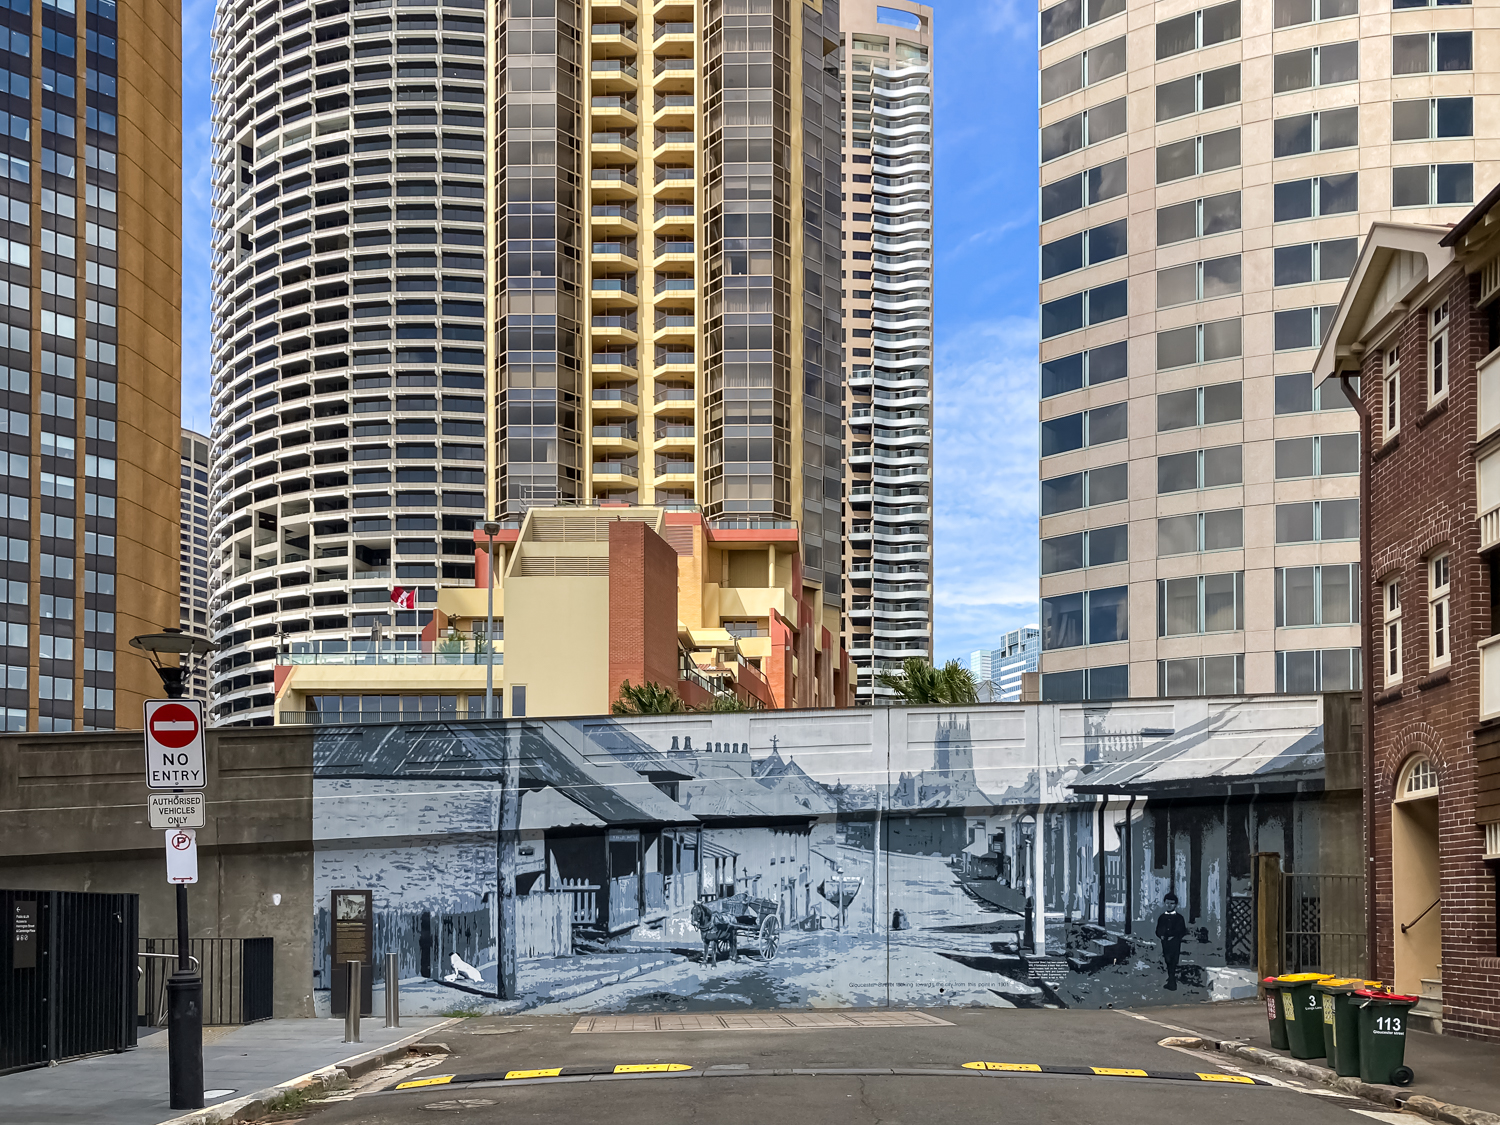 A large streetscape mural painted on the side of a freeway wall, with skyscrapers in the background